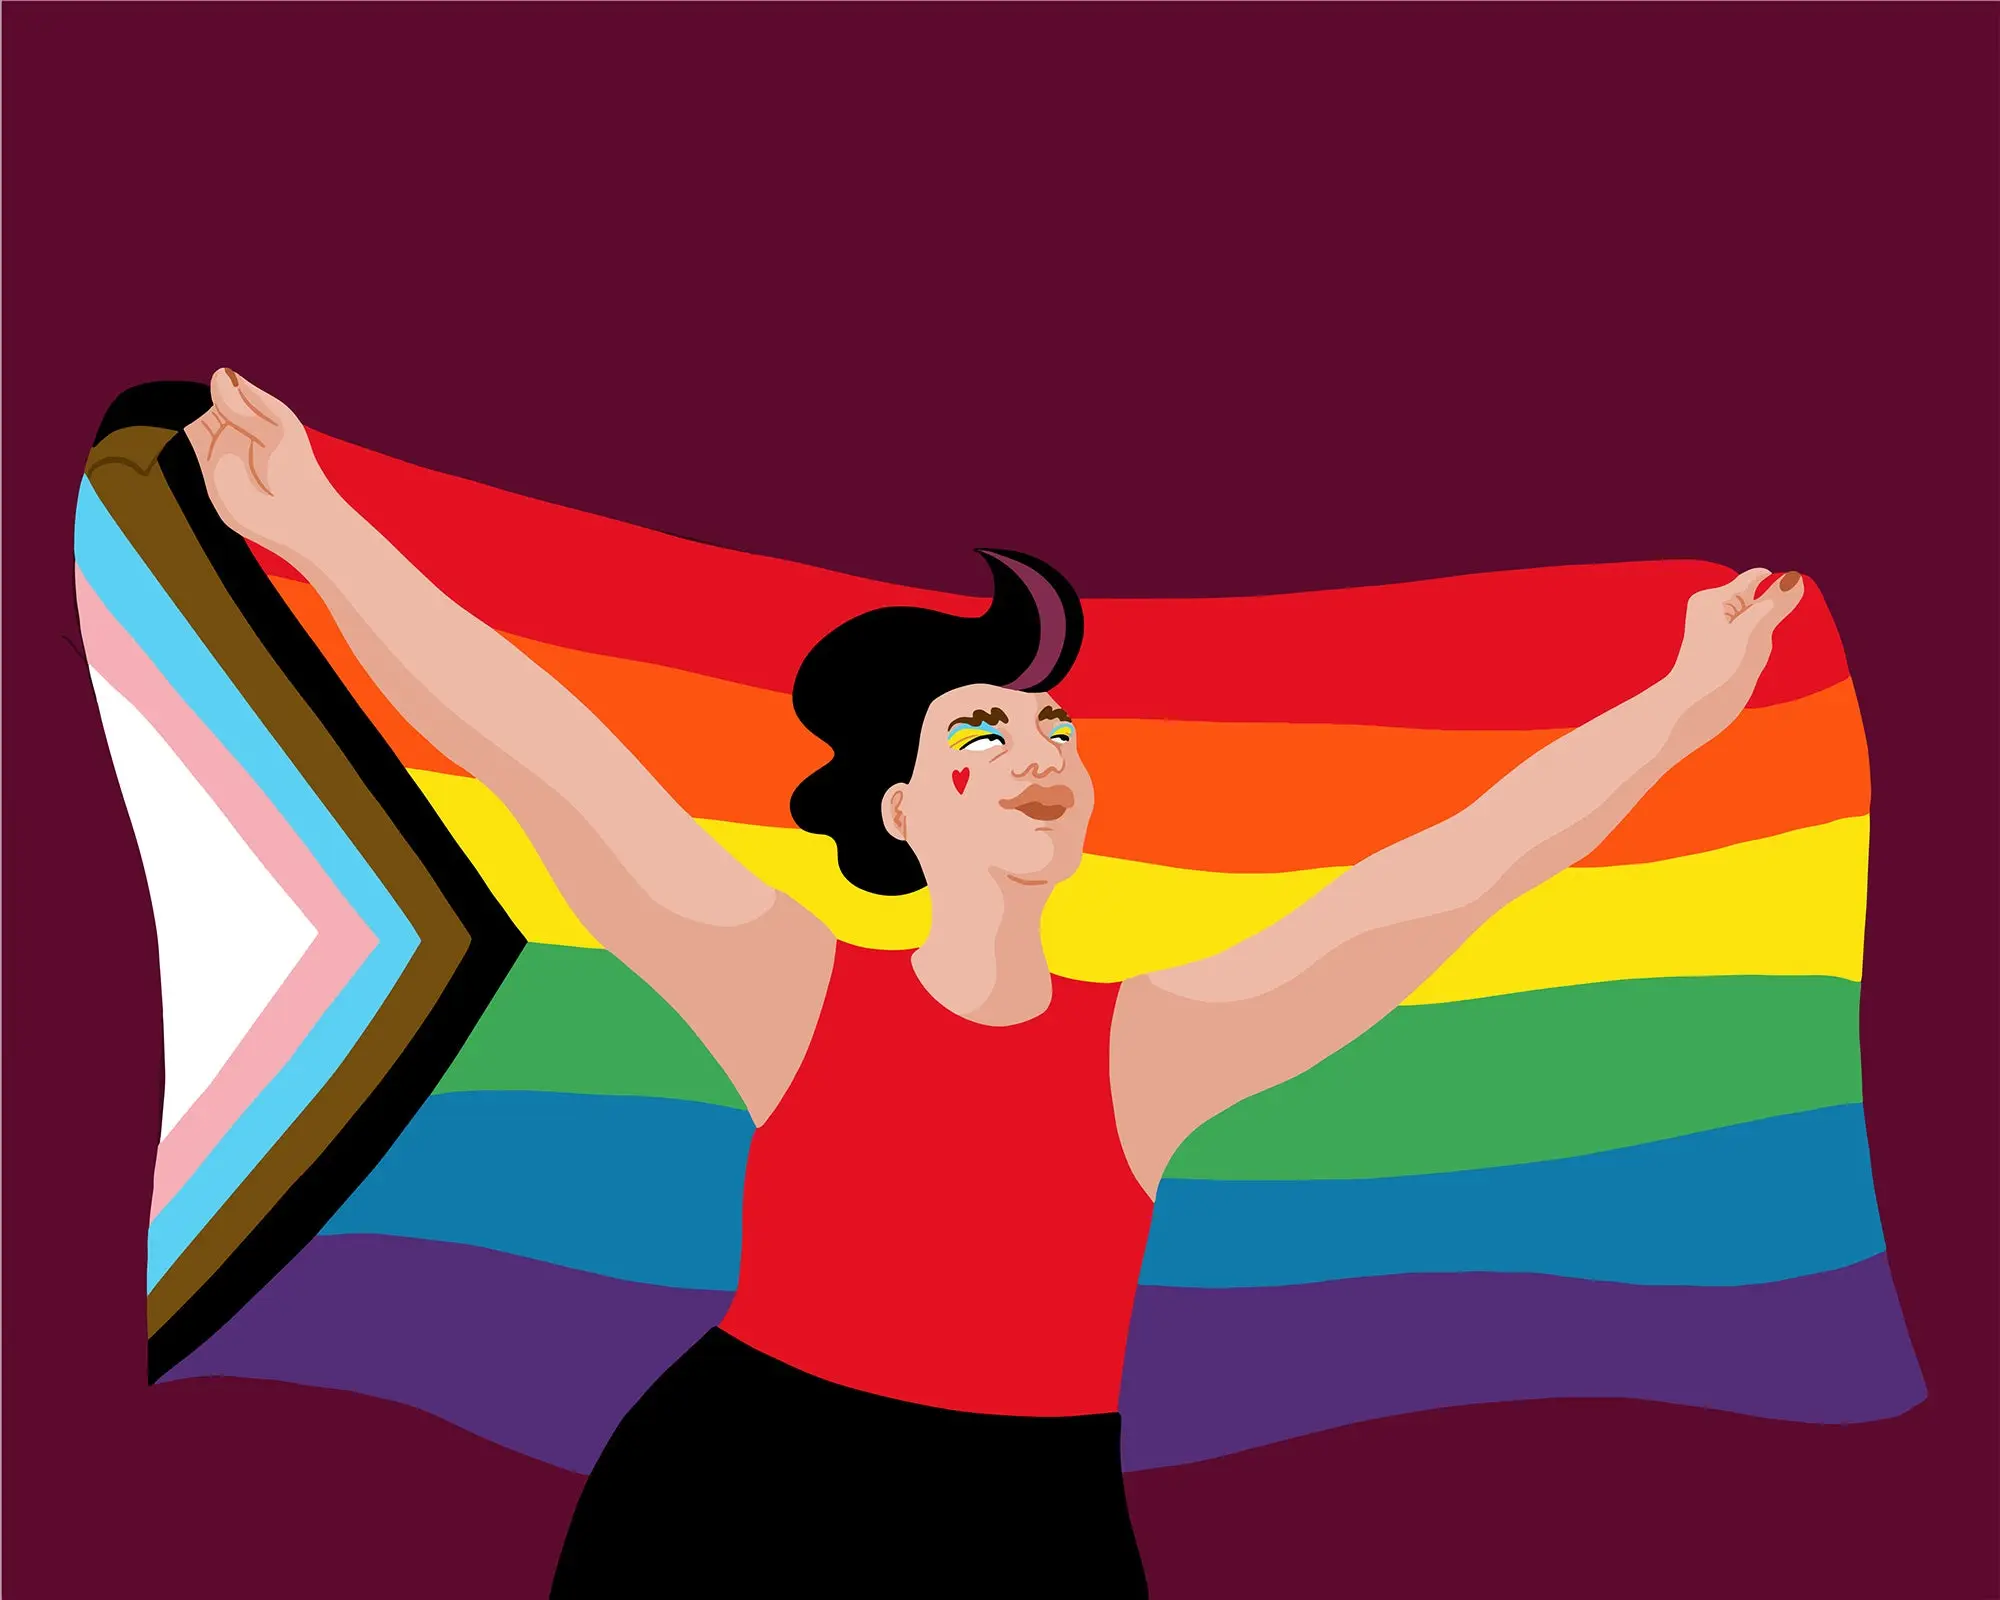 Illustrated image by Andrea Vollgas; person holding Pride flag like a cape